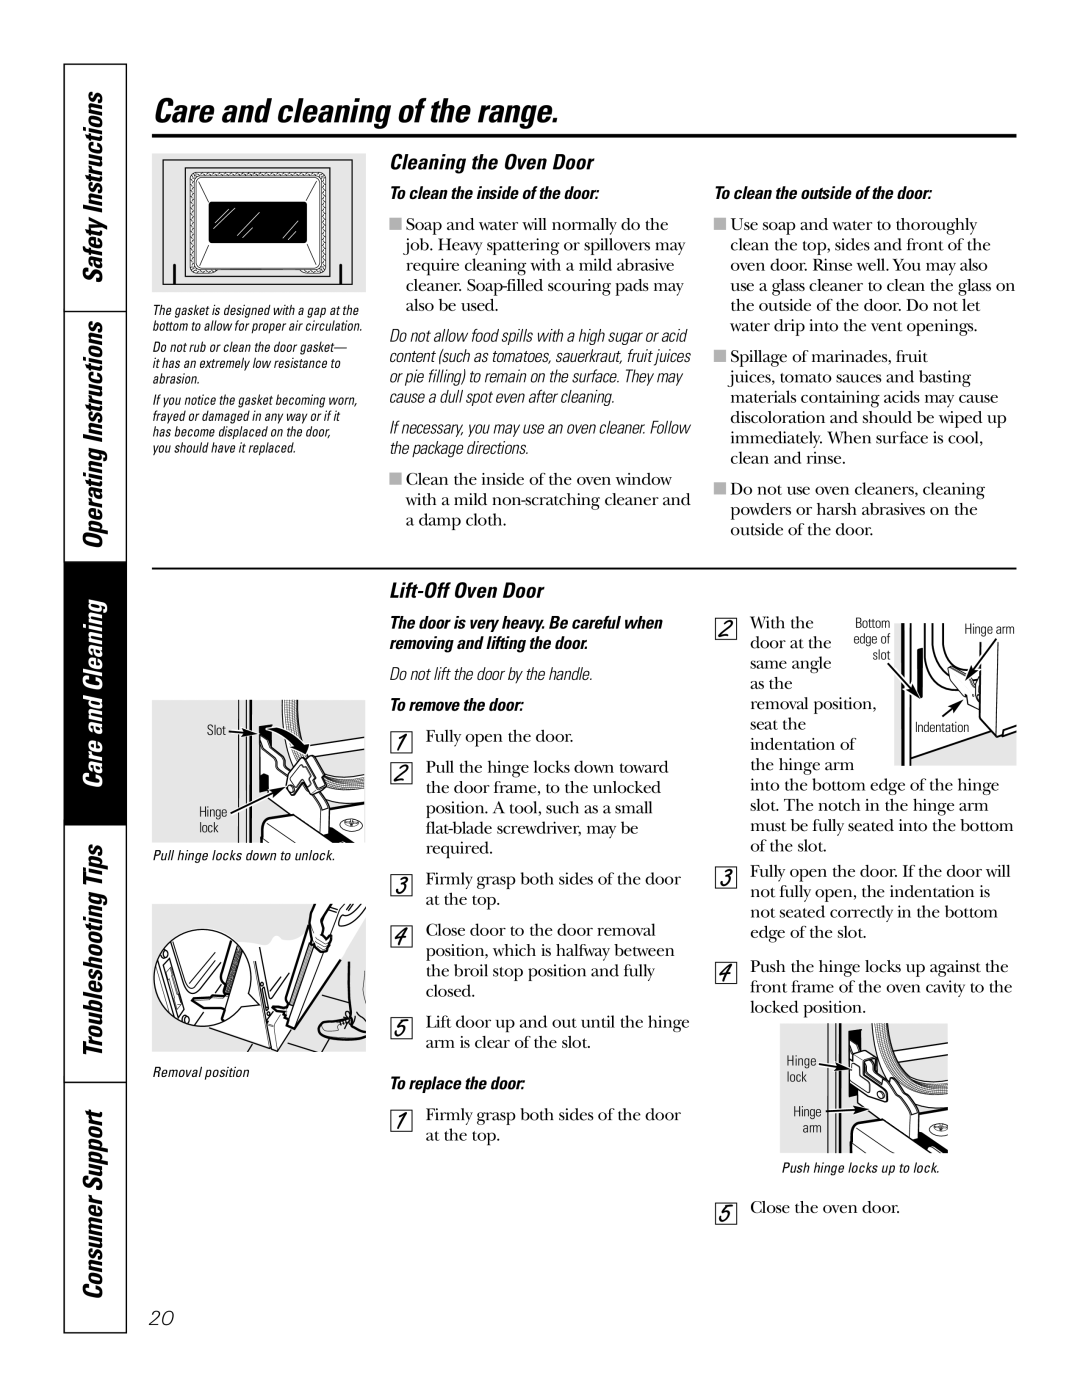 GE JBS55 Operating Instructions Safety, Consumer, Care and Cleaning, Cleaning the Oven Door, Lift-Off Oven Door 